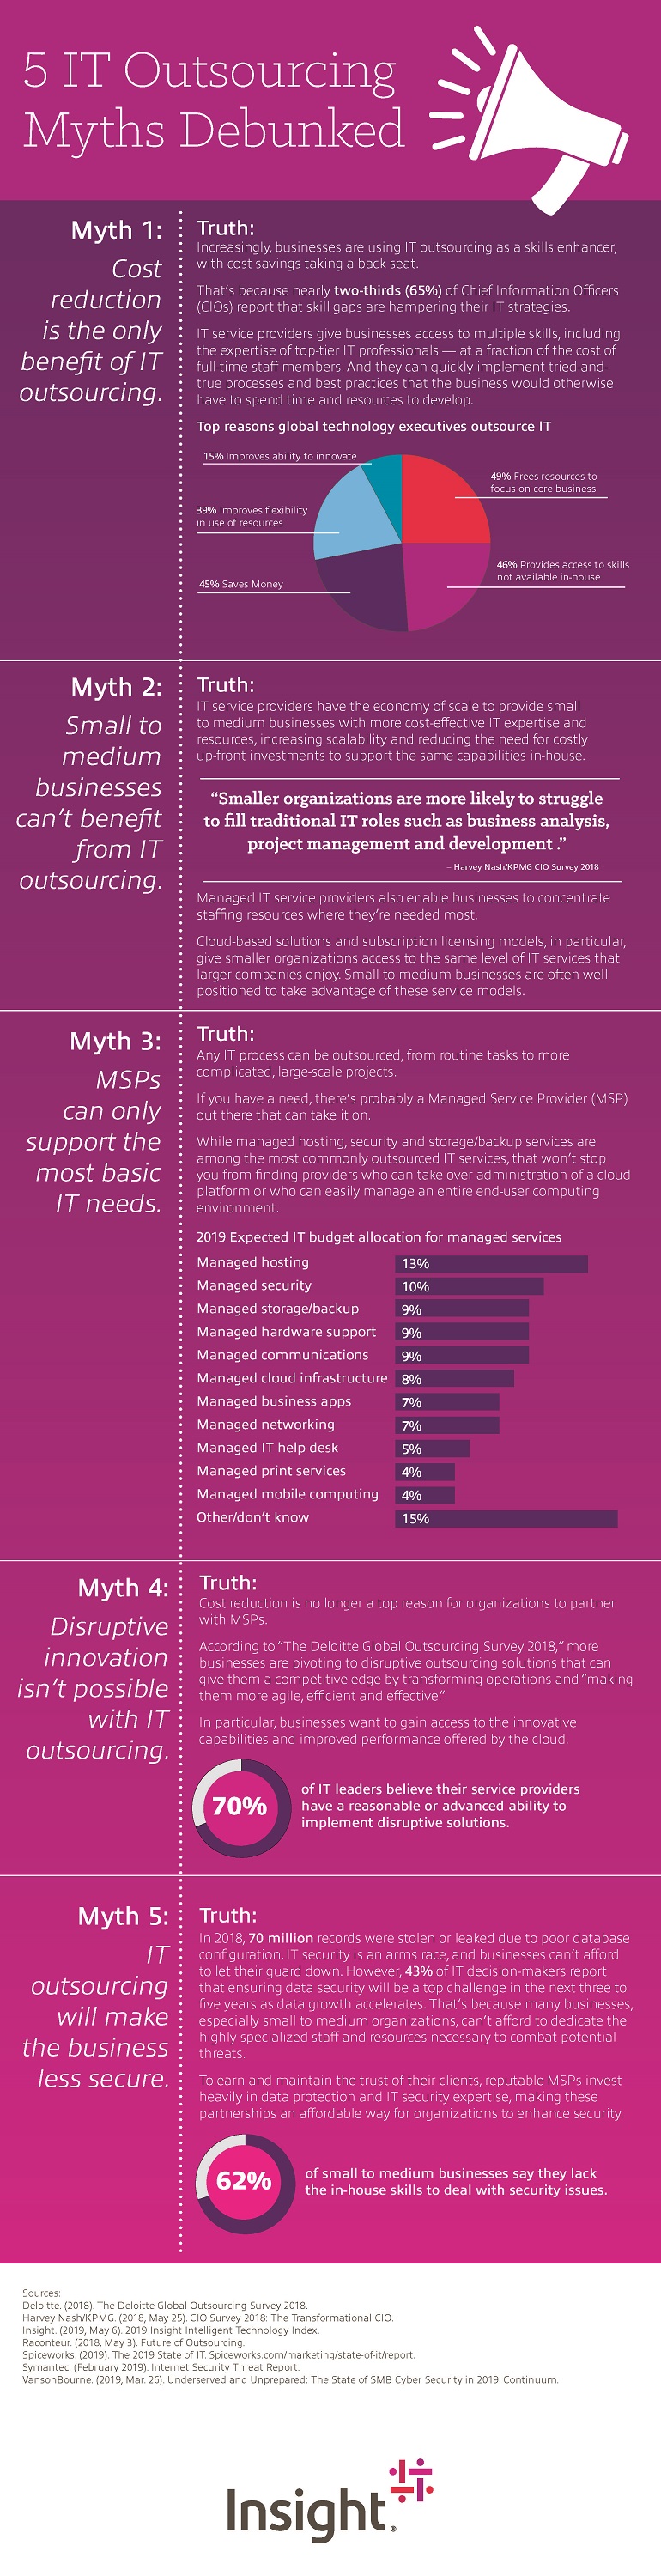 Infographic displaying 5 IT Outsourcing Myths Debunked. Translated below.